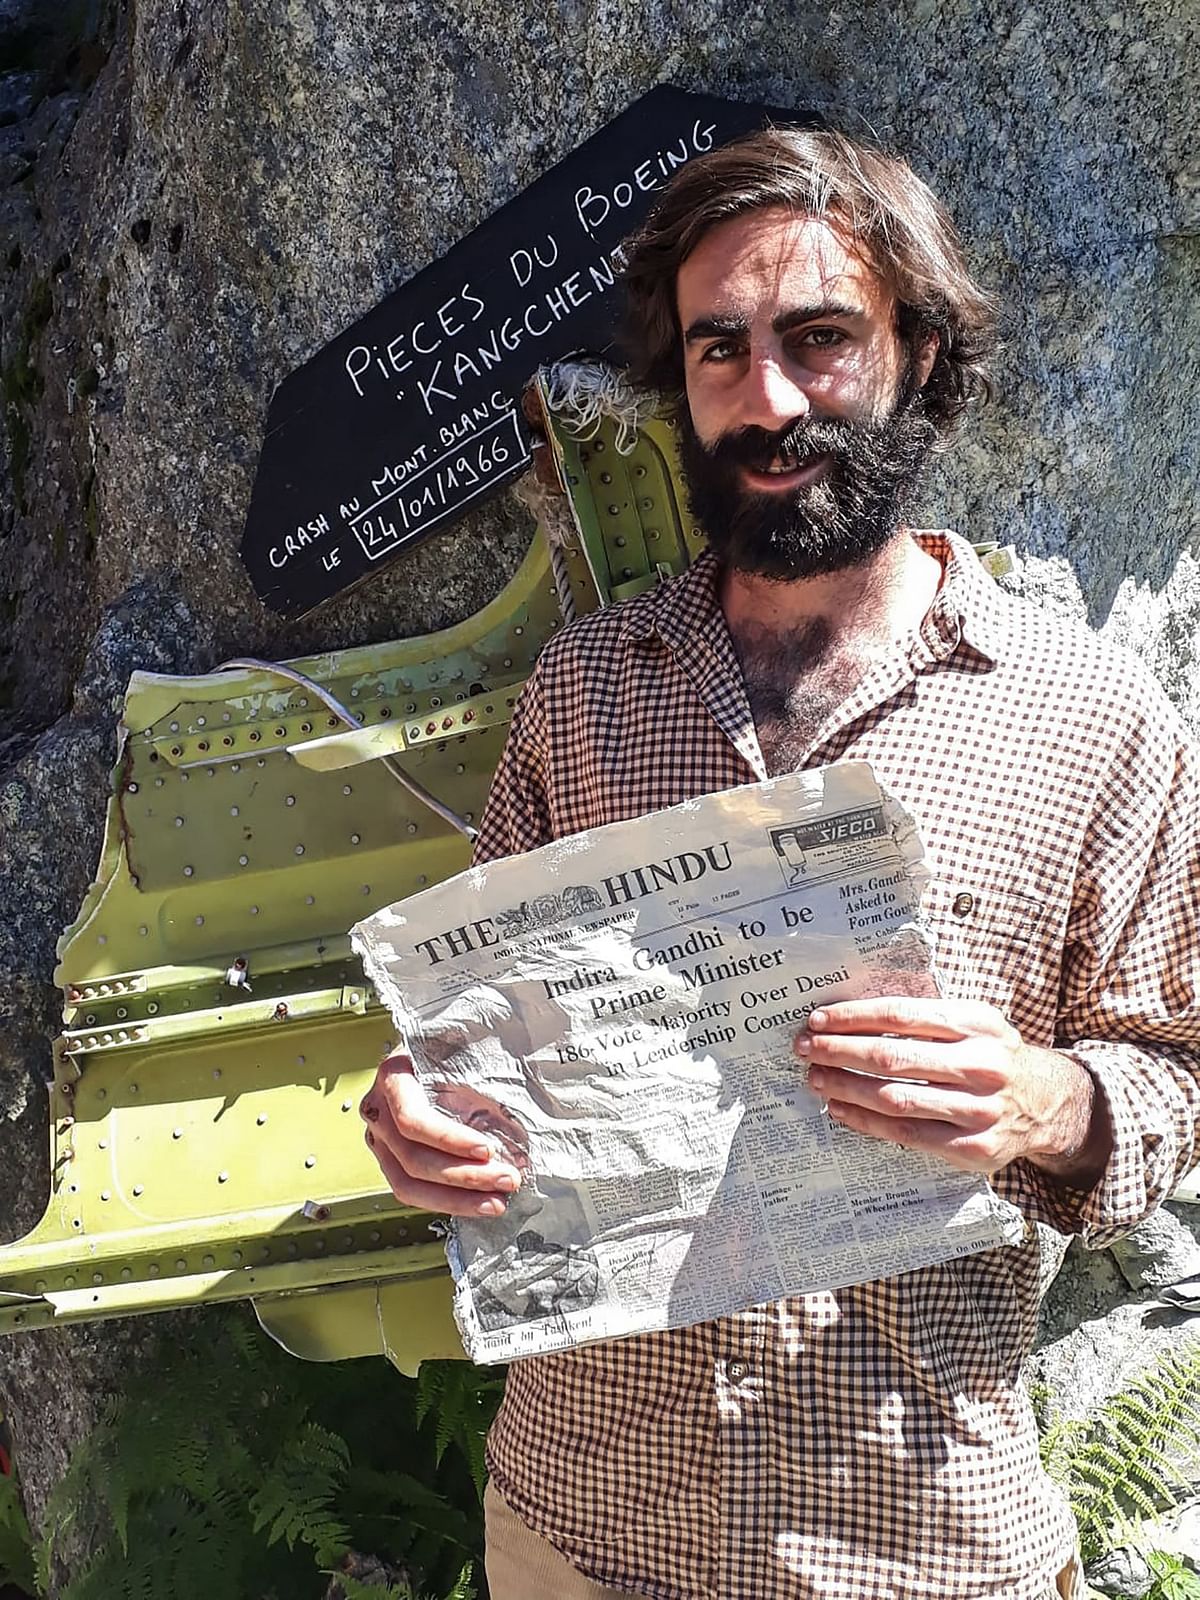 Thimotee Mottin, manager of the cafe-restaurant Cabane du Cerro near the Bossons glacier, poses on July 9, 2020, at his cafe near Chamonix in the French Alps, holding a 1966 copy of Indian newspaper The Hindu, likely to have been on board the Air India Boeing 707